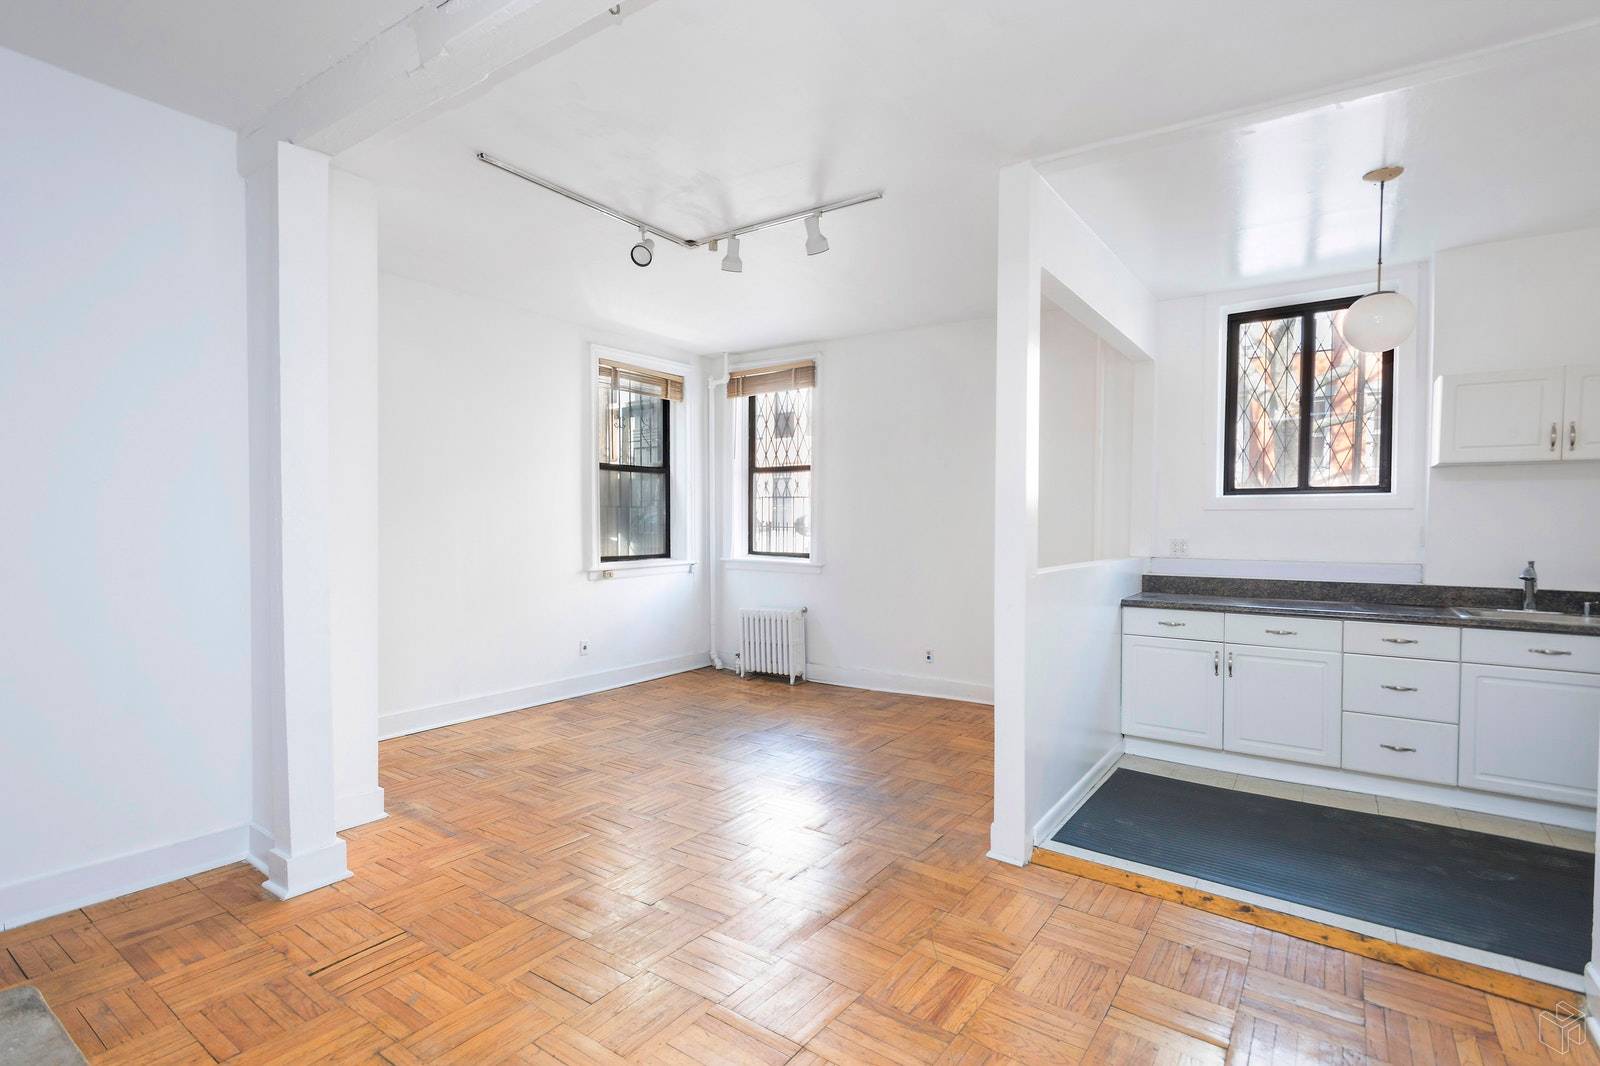 Don't miss the opportunity to design your own home in an ultra prime Boerum Hill location !